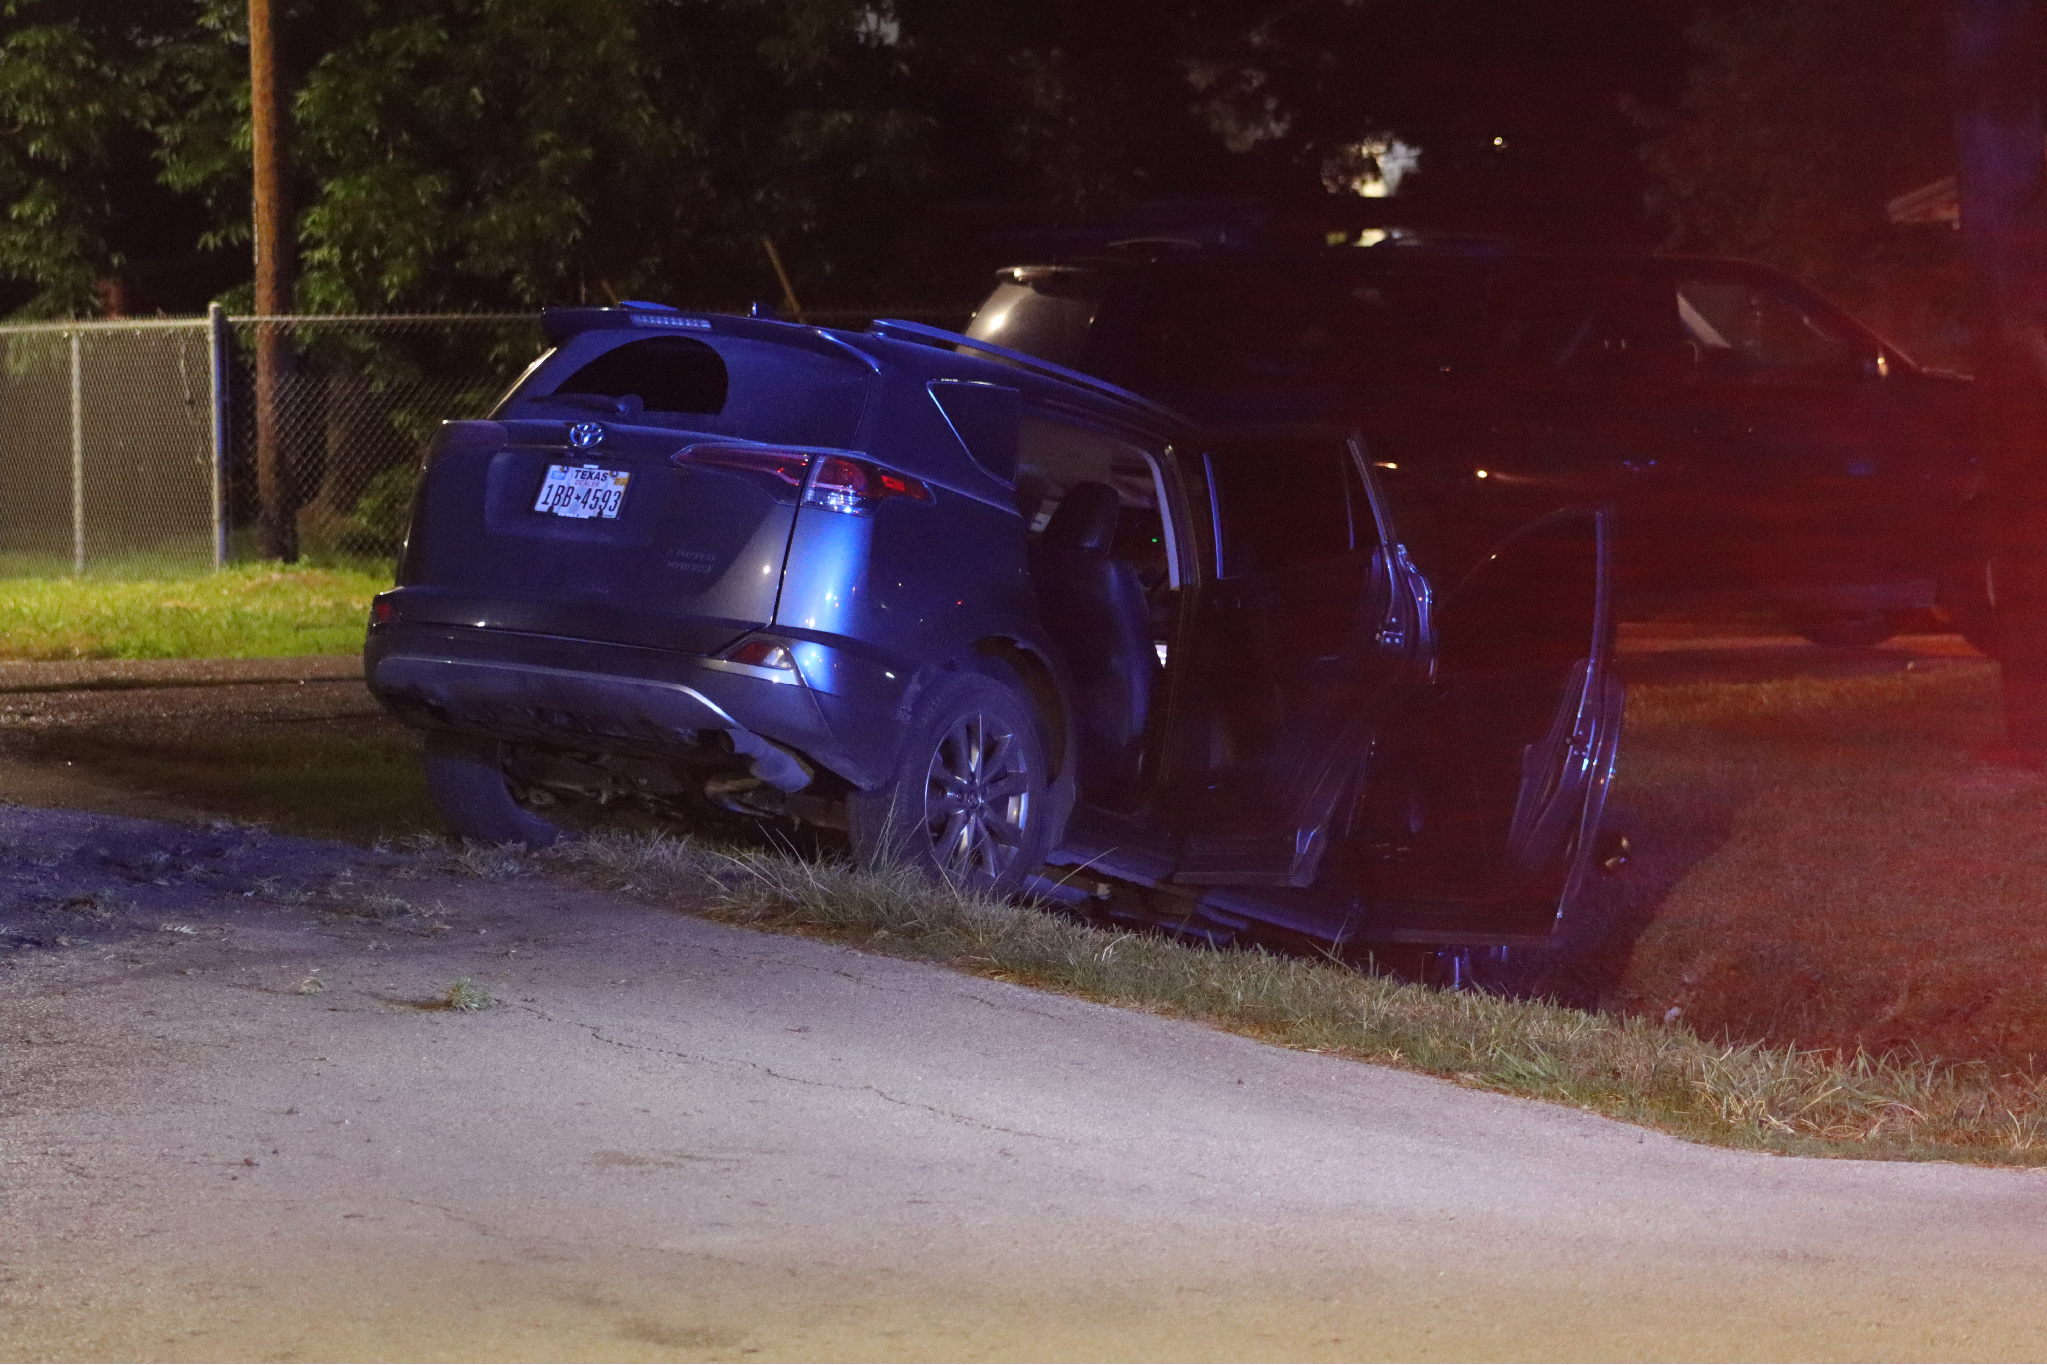 Suspects crashed this Toyota RAV4 into a ditch during a police chase in Houston